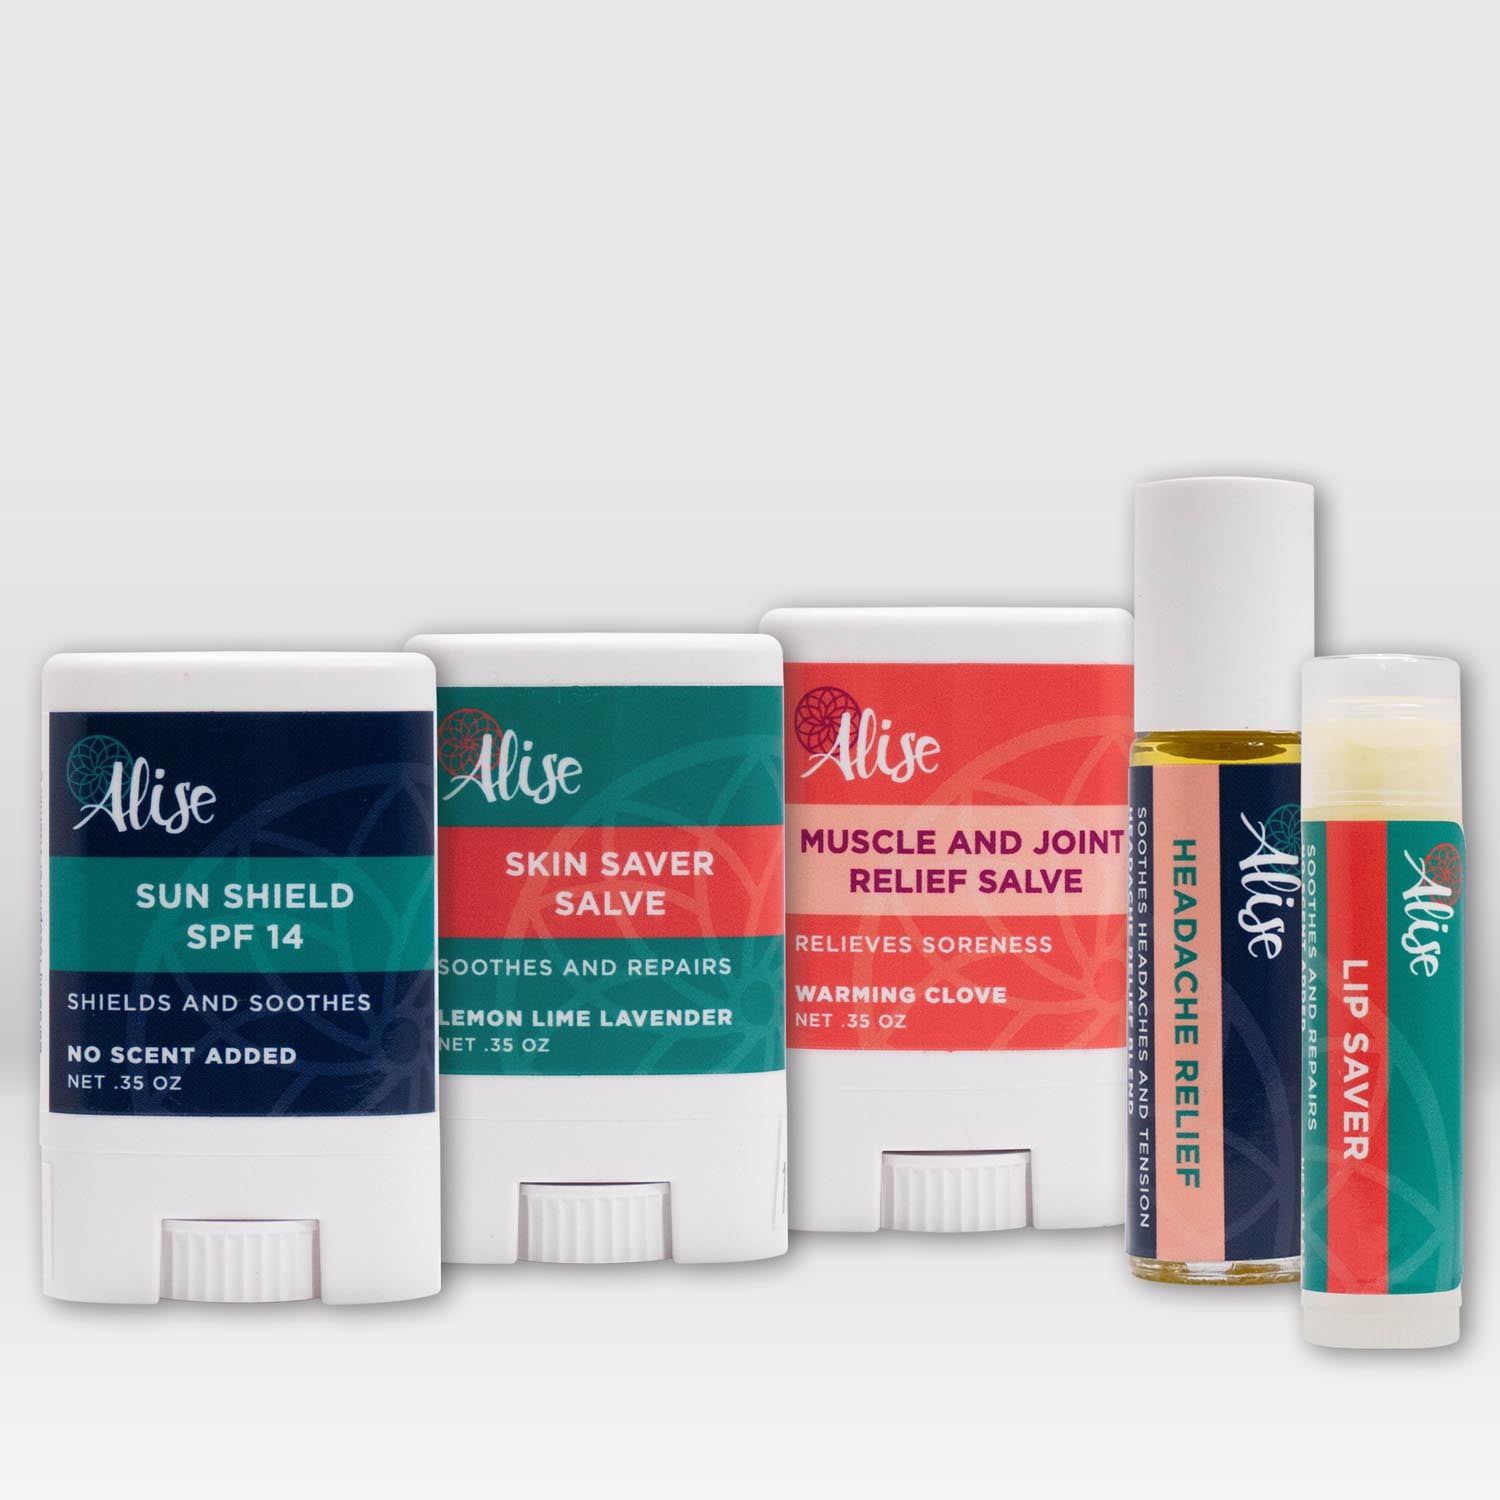 Adventurer's Kit handcrafted by Alise Body Care